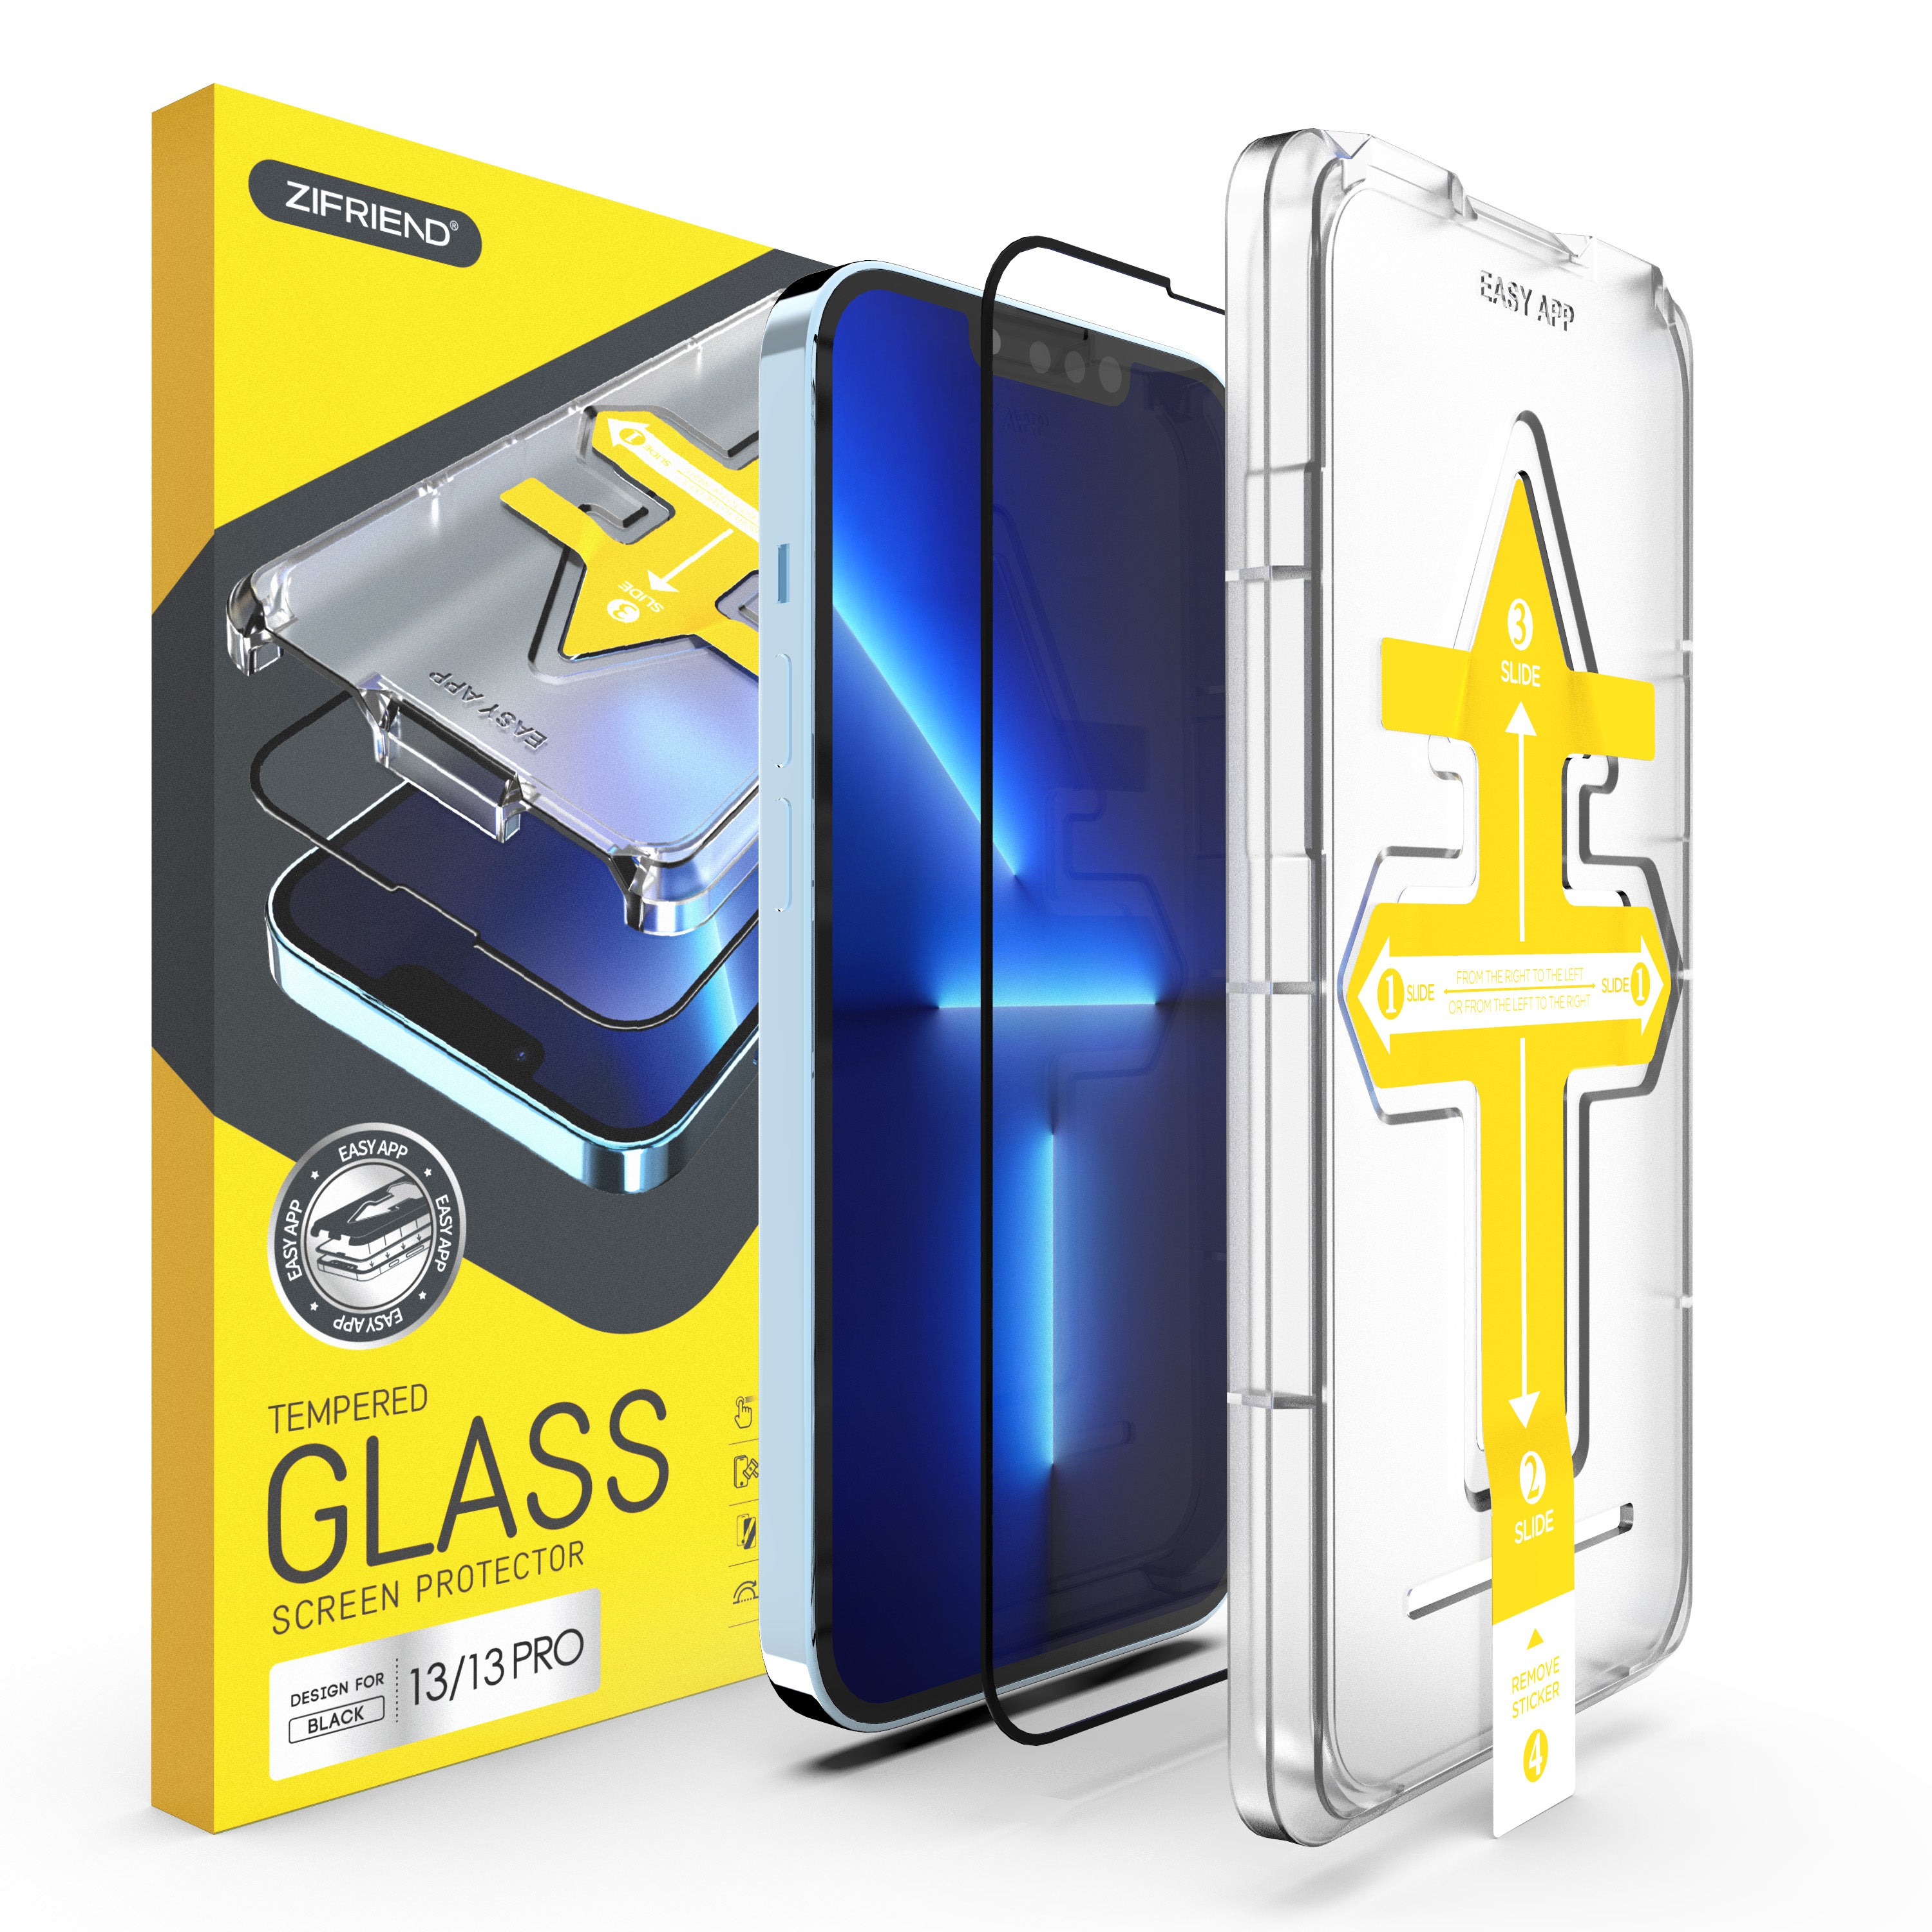 Zifriend Premium Glass Screen Protector for iPhone 13 / 13 Pro - Clear